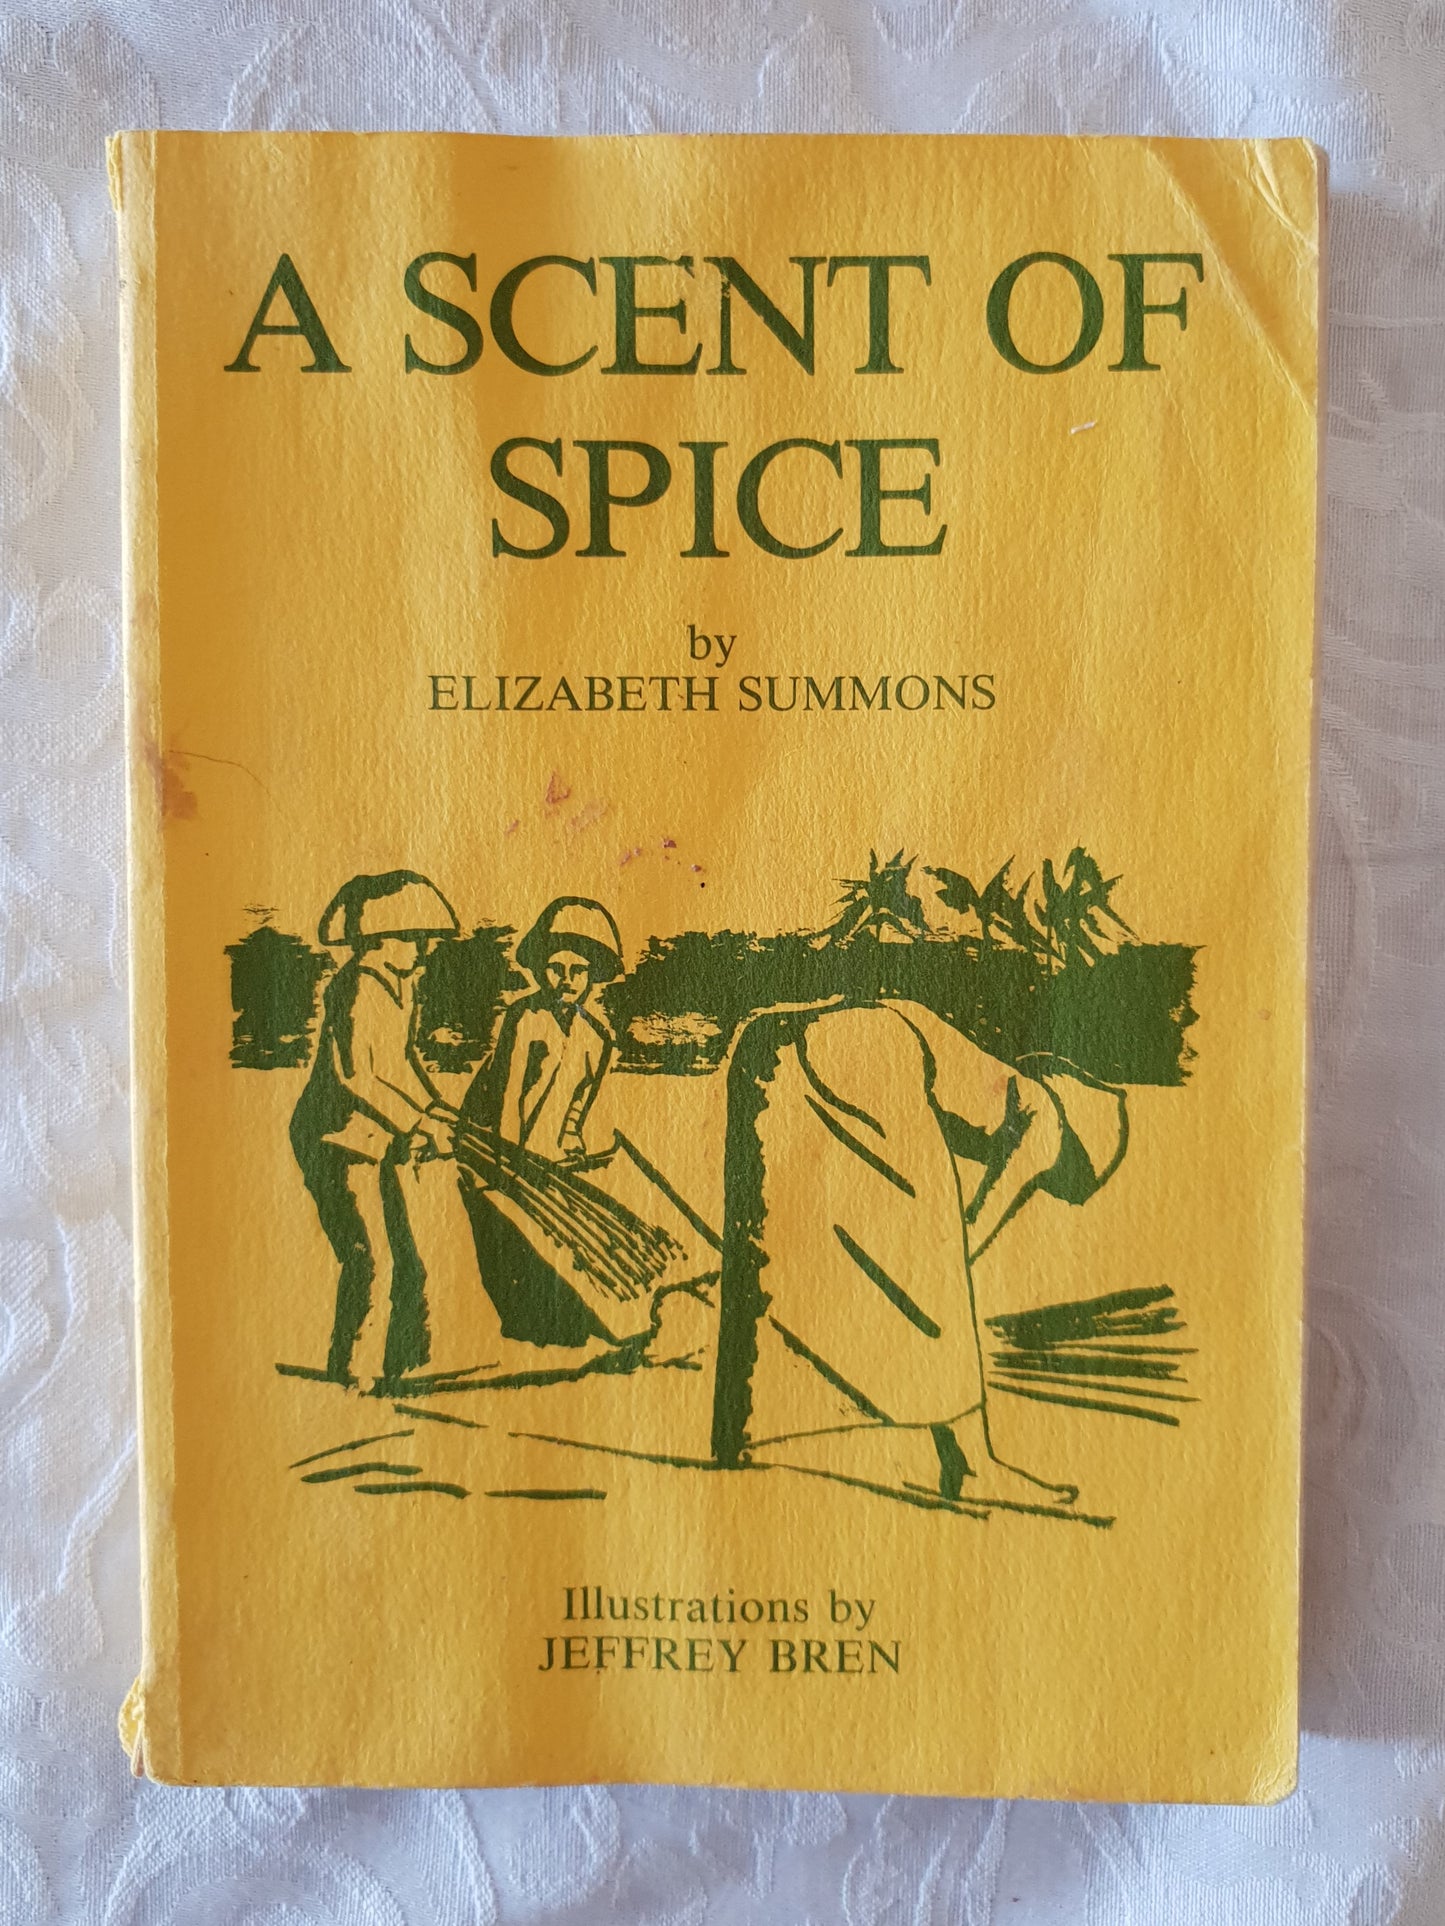 A Scent of Spice  by Elizabeth Summons, illustrations by Jeffrey Bren